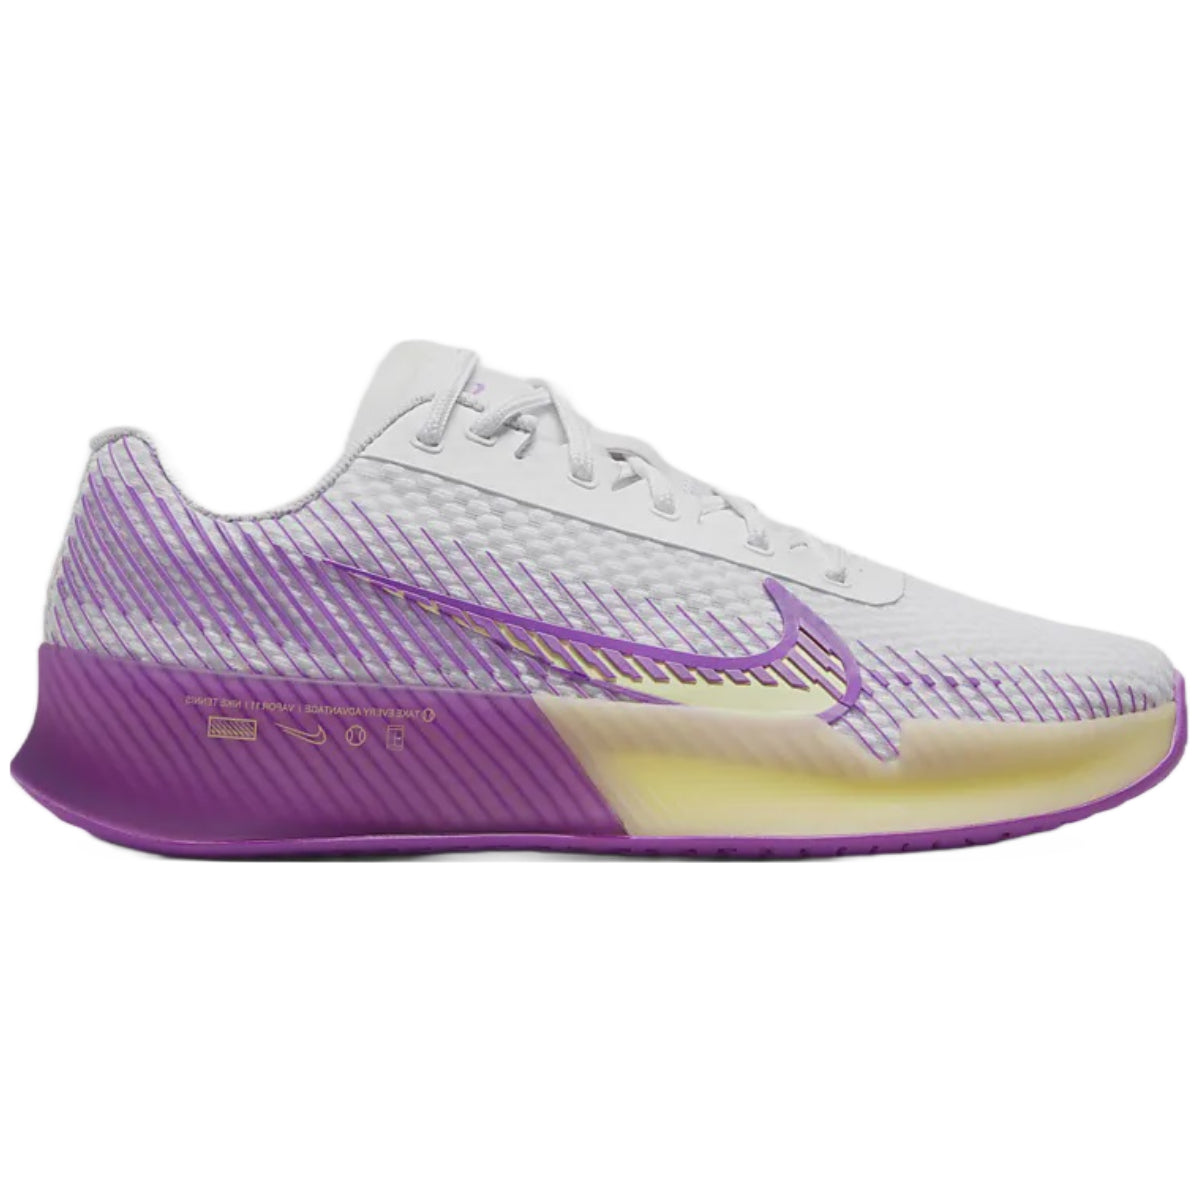 Nike Women's Zoom Vapor 11 Tennis Shoes - DR6965-101 – All About Tennis